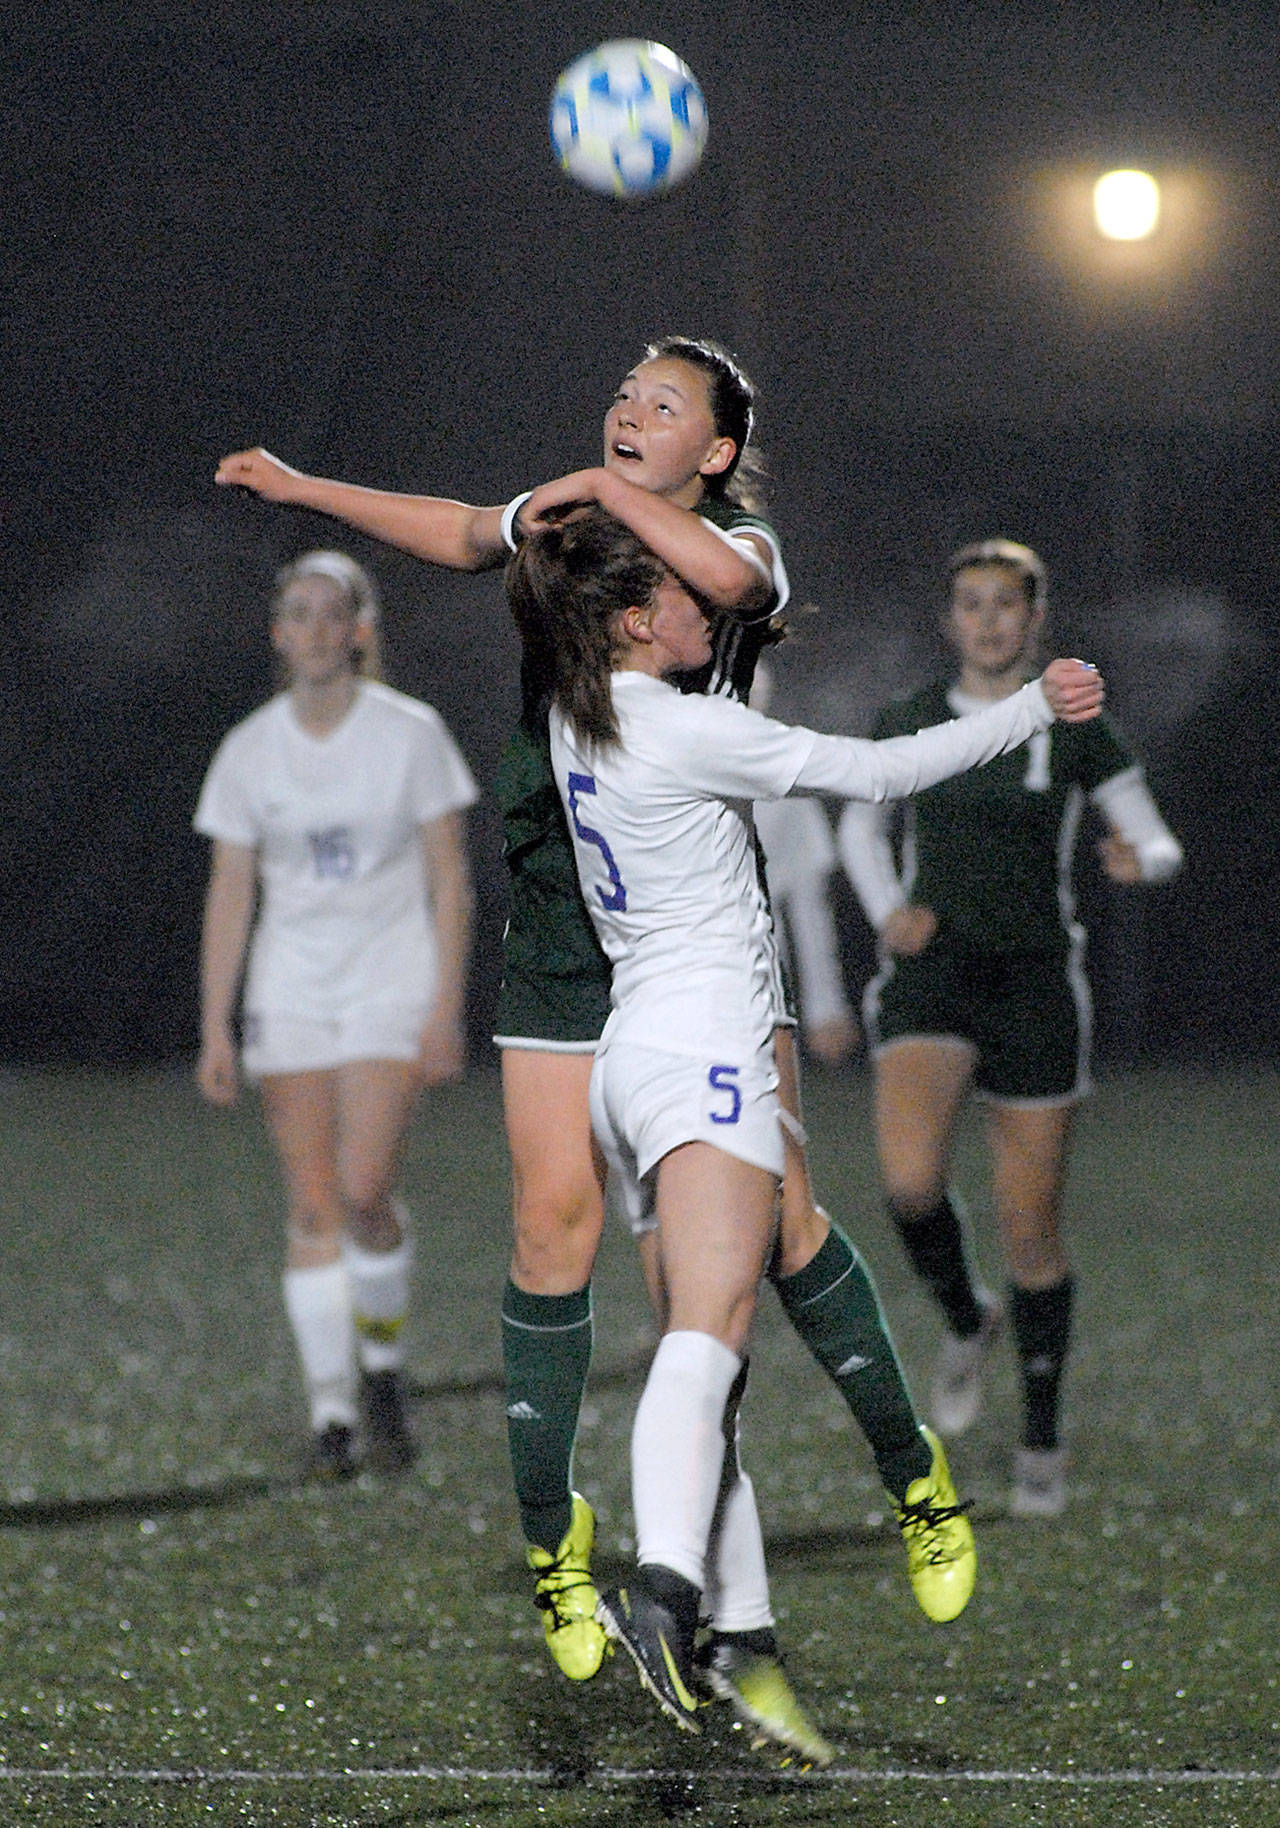 Port Angeles’ Jada Cargo, top, uses Sequim’s Mary McAleer for a boost to make the header during Saturday night’s seeding match at Wally Sigmar Field in Port Angeles. (Keith Thorpe/Peninsula Daily News)